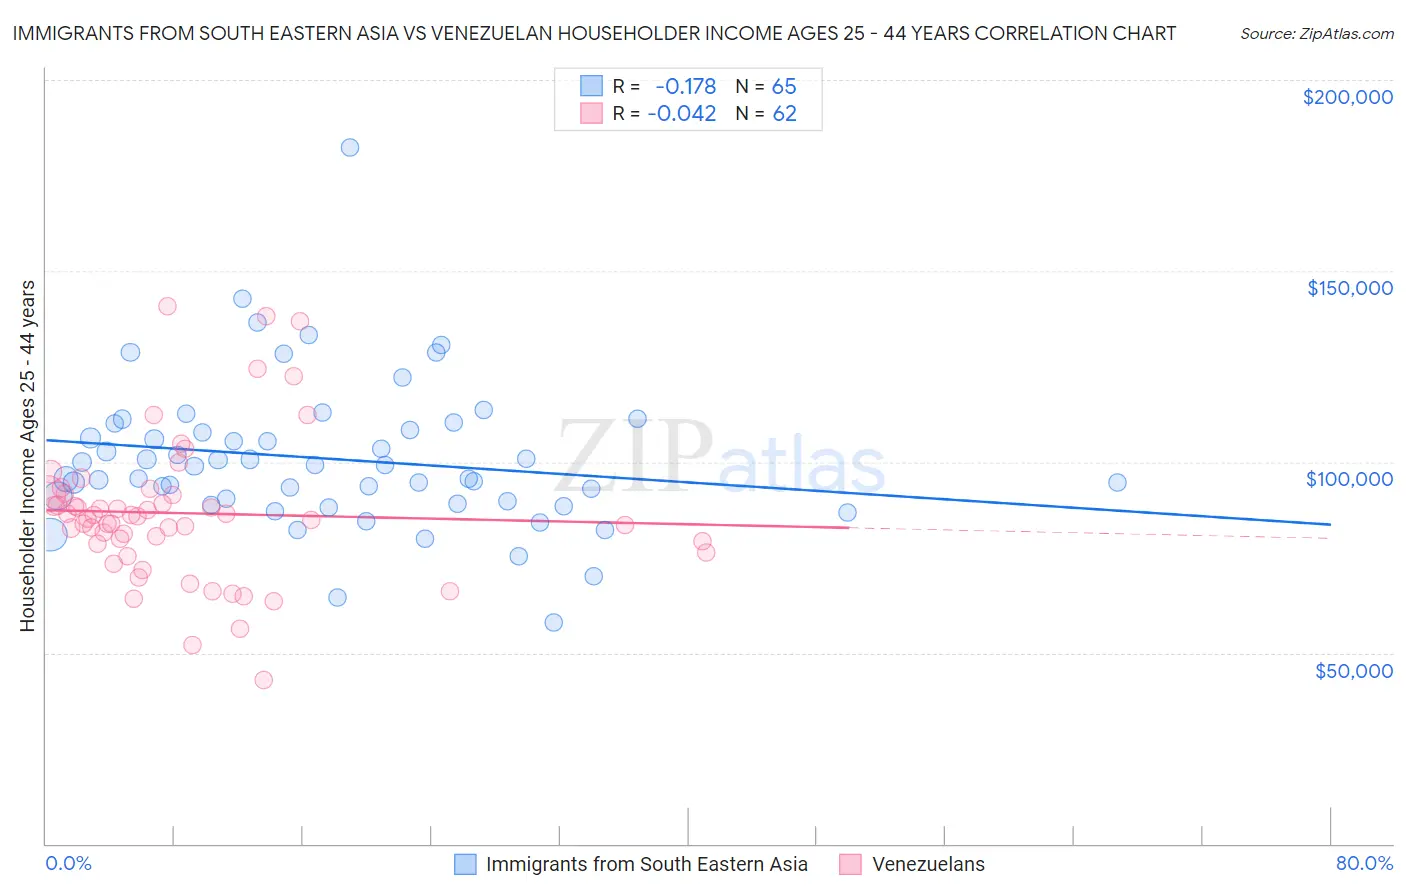 Immigrants from South Eastern Asia vs Venezuelan Householder Income Ages 25 - 44 years